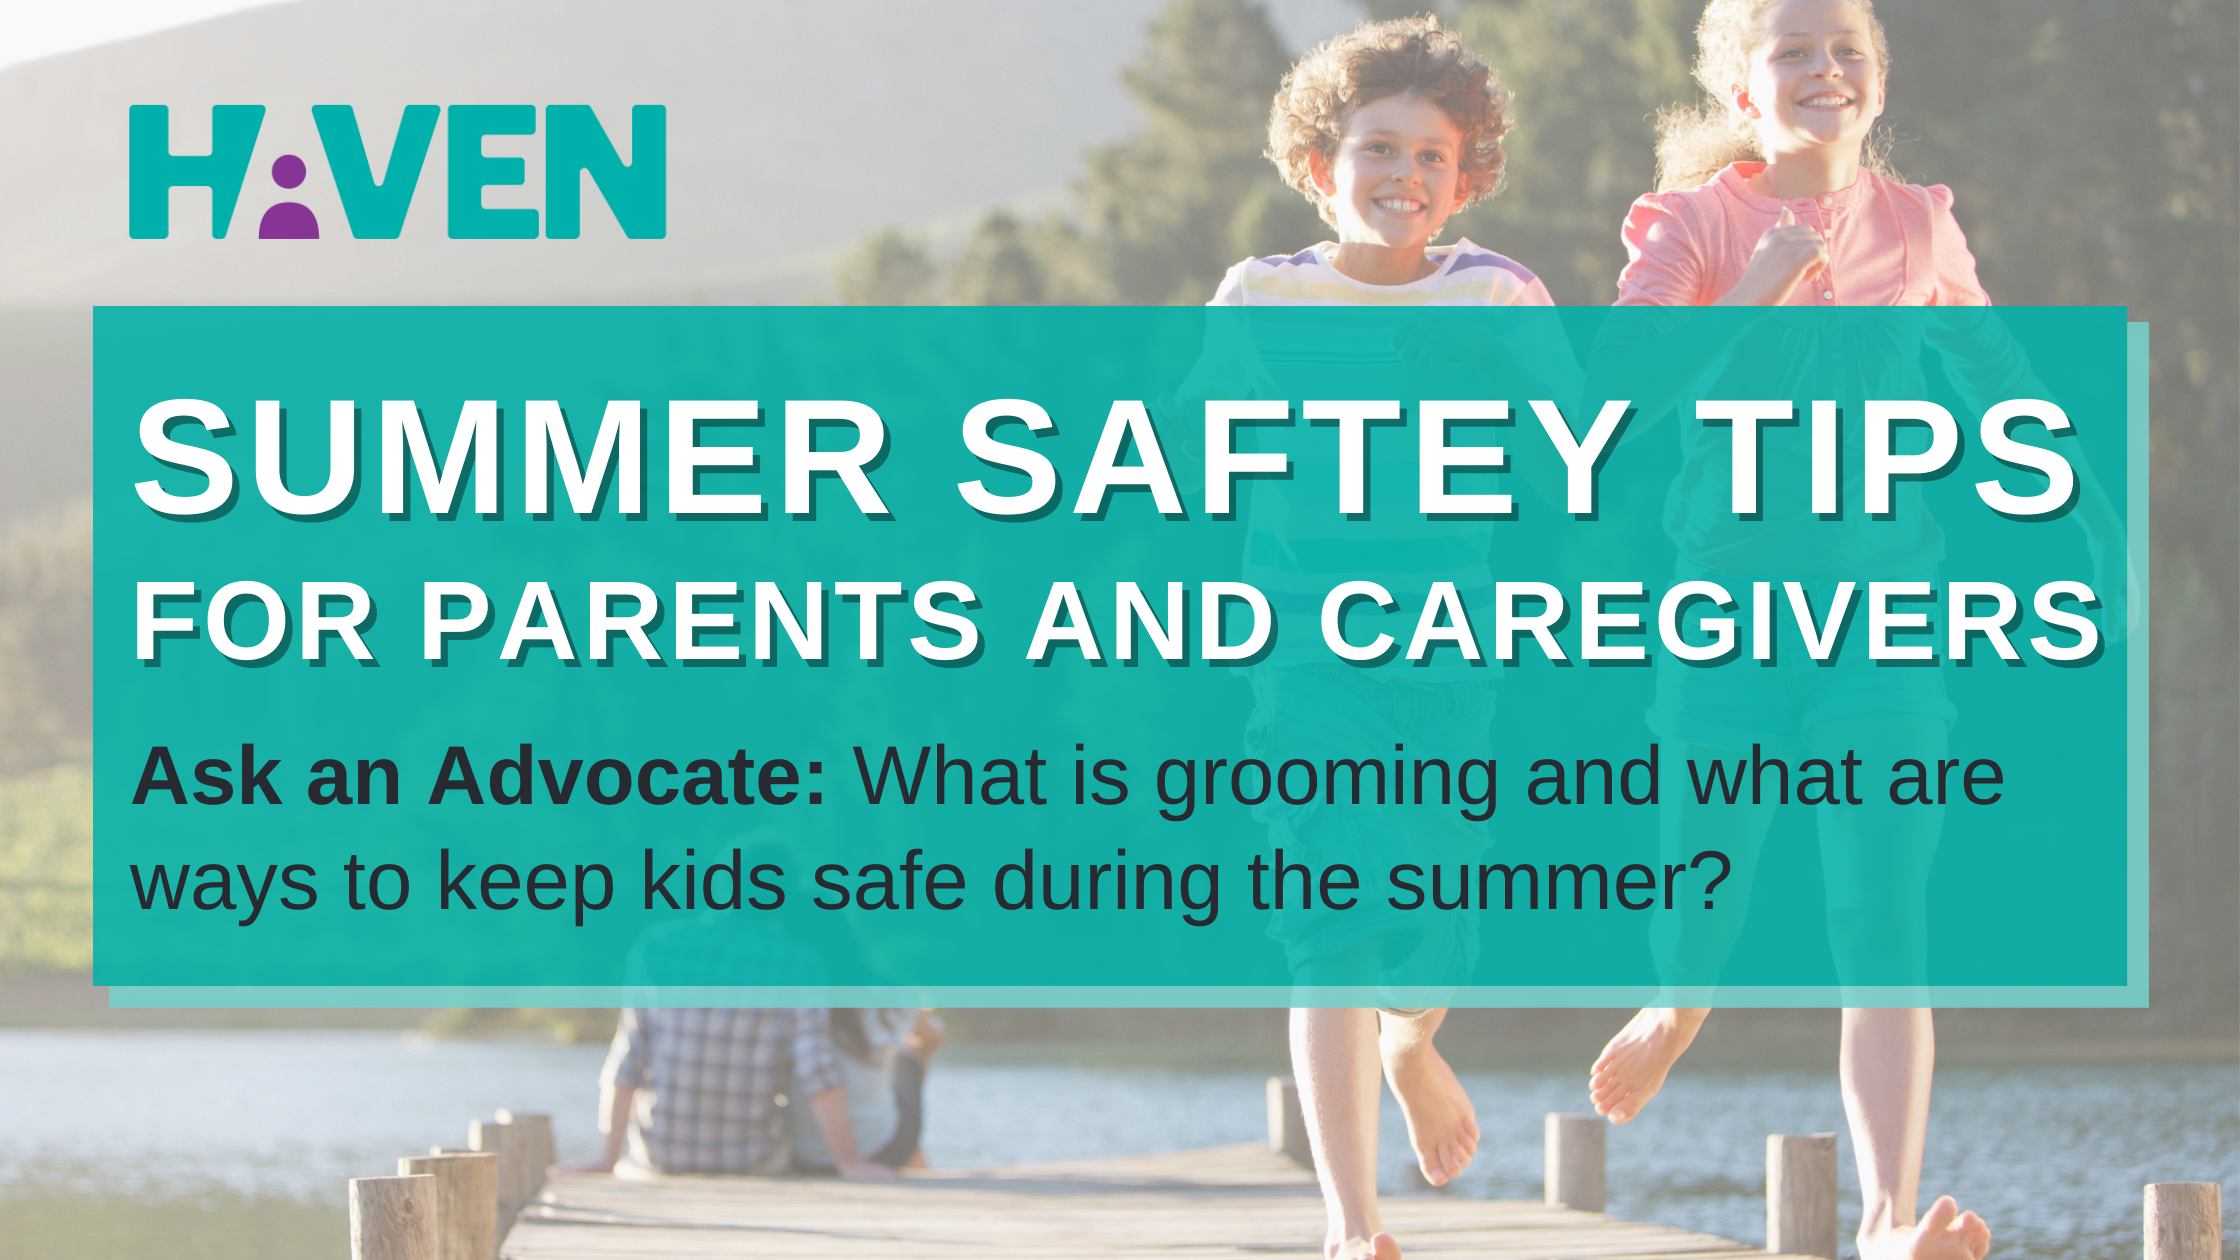 Ask An Advocate: Summer Time Safety Tips for Parents